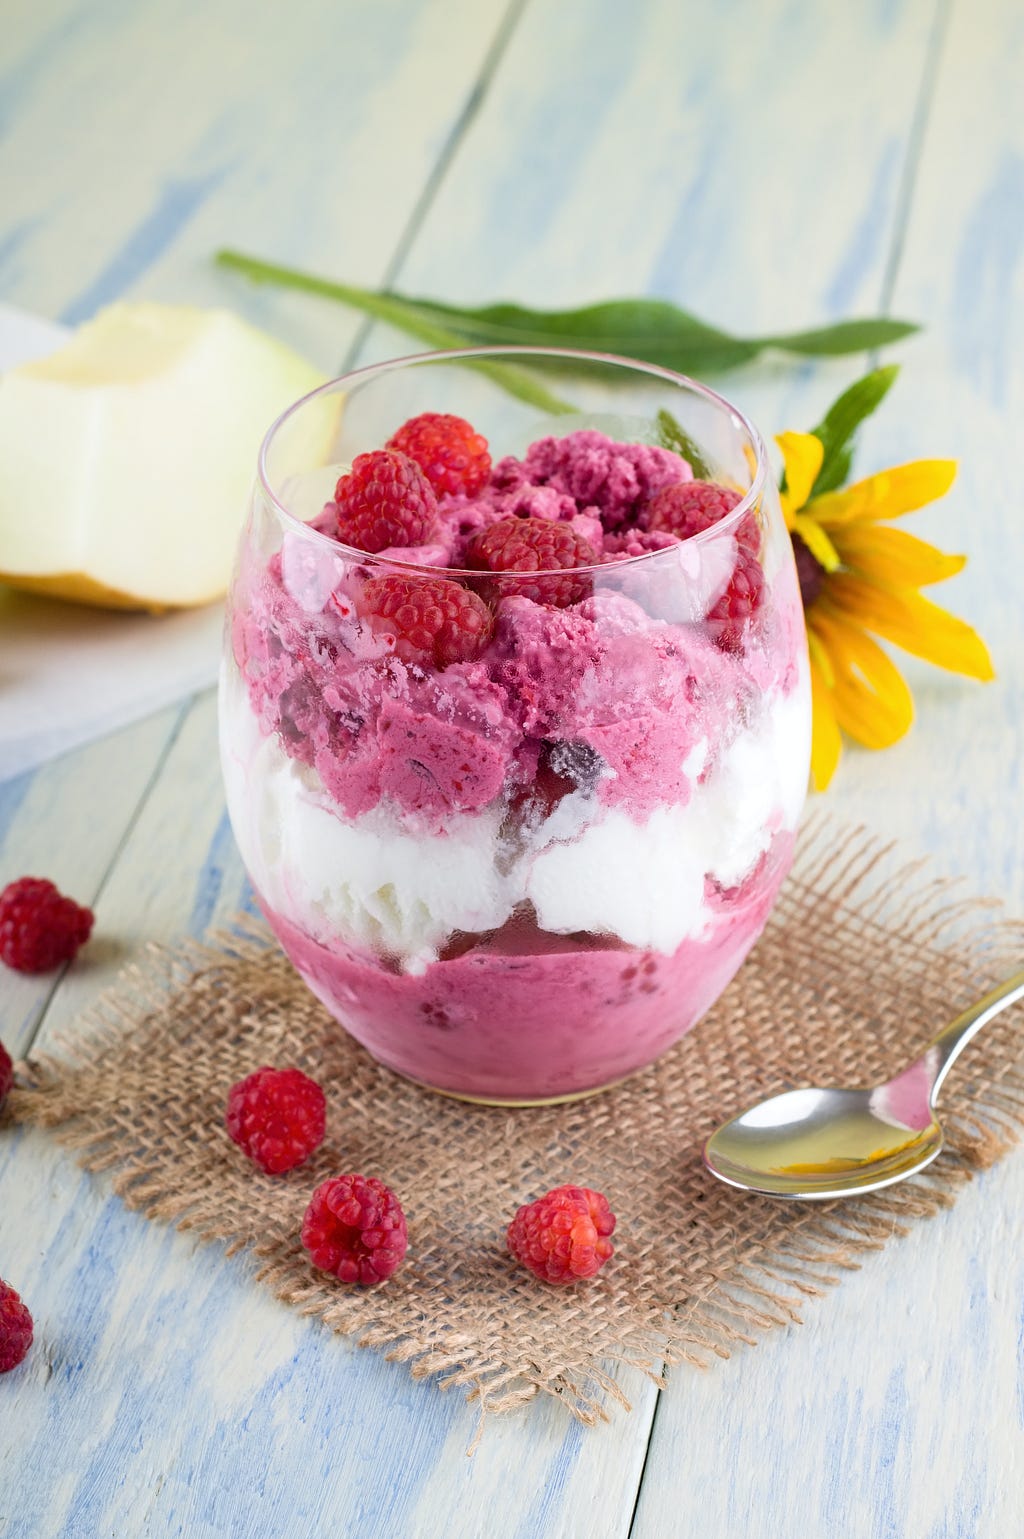 A cup of kindness — beautiful, brightly lit glass of white and raspberry colored ice cream, topped with raspberries and with a daisy laid nearby.